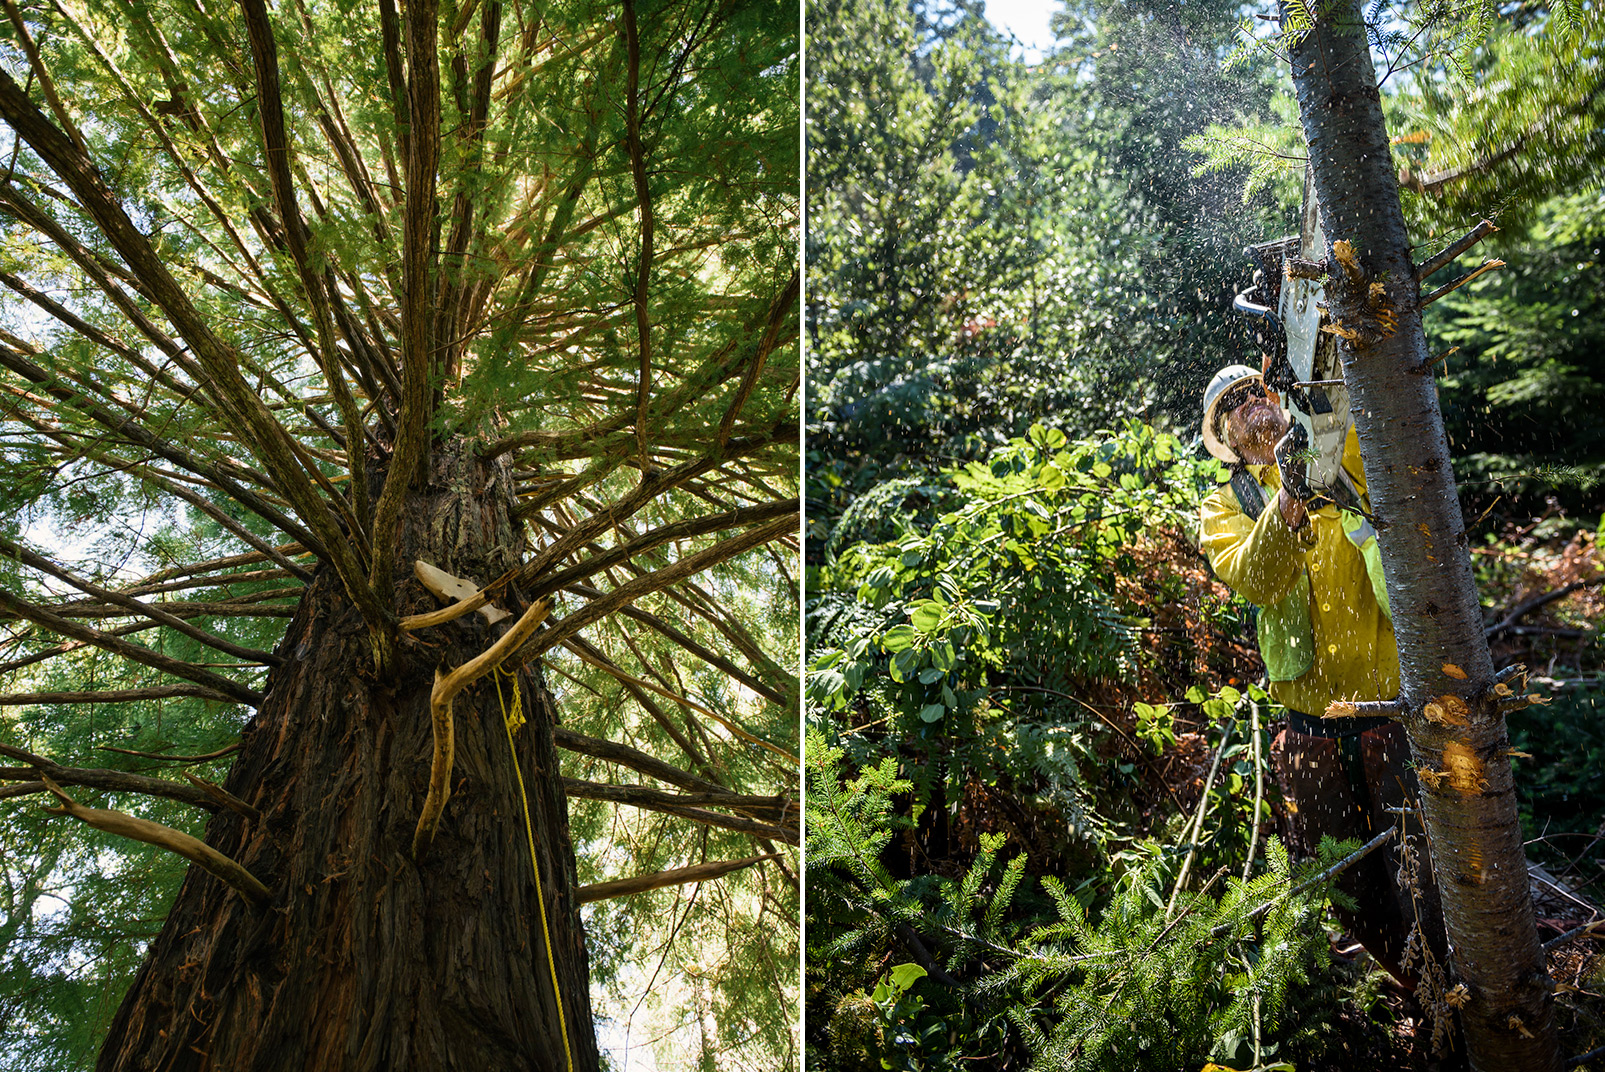 “When you’re walking around, there’s downed trees everywhere,” says Arnold. To restore these forests, members of the Yurok are thinning overgrown trees (right) and clearing brush to create fire breaks and protect the land from destructive wildfires. Photo © Kevin Arnold